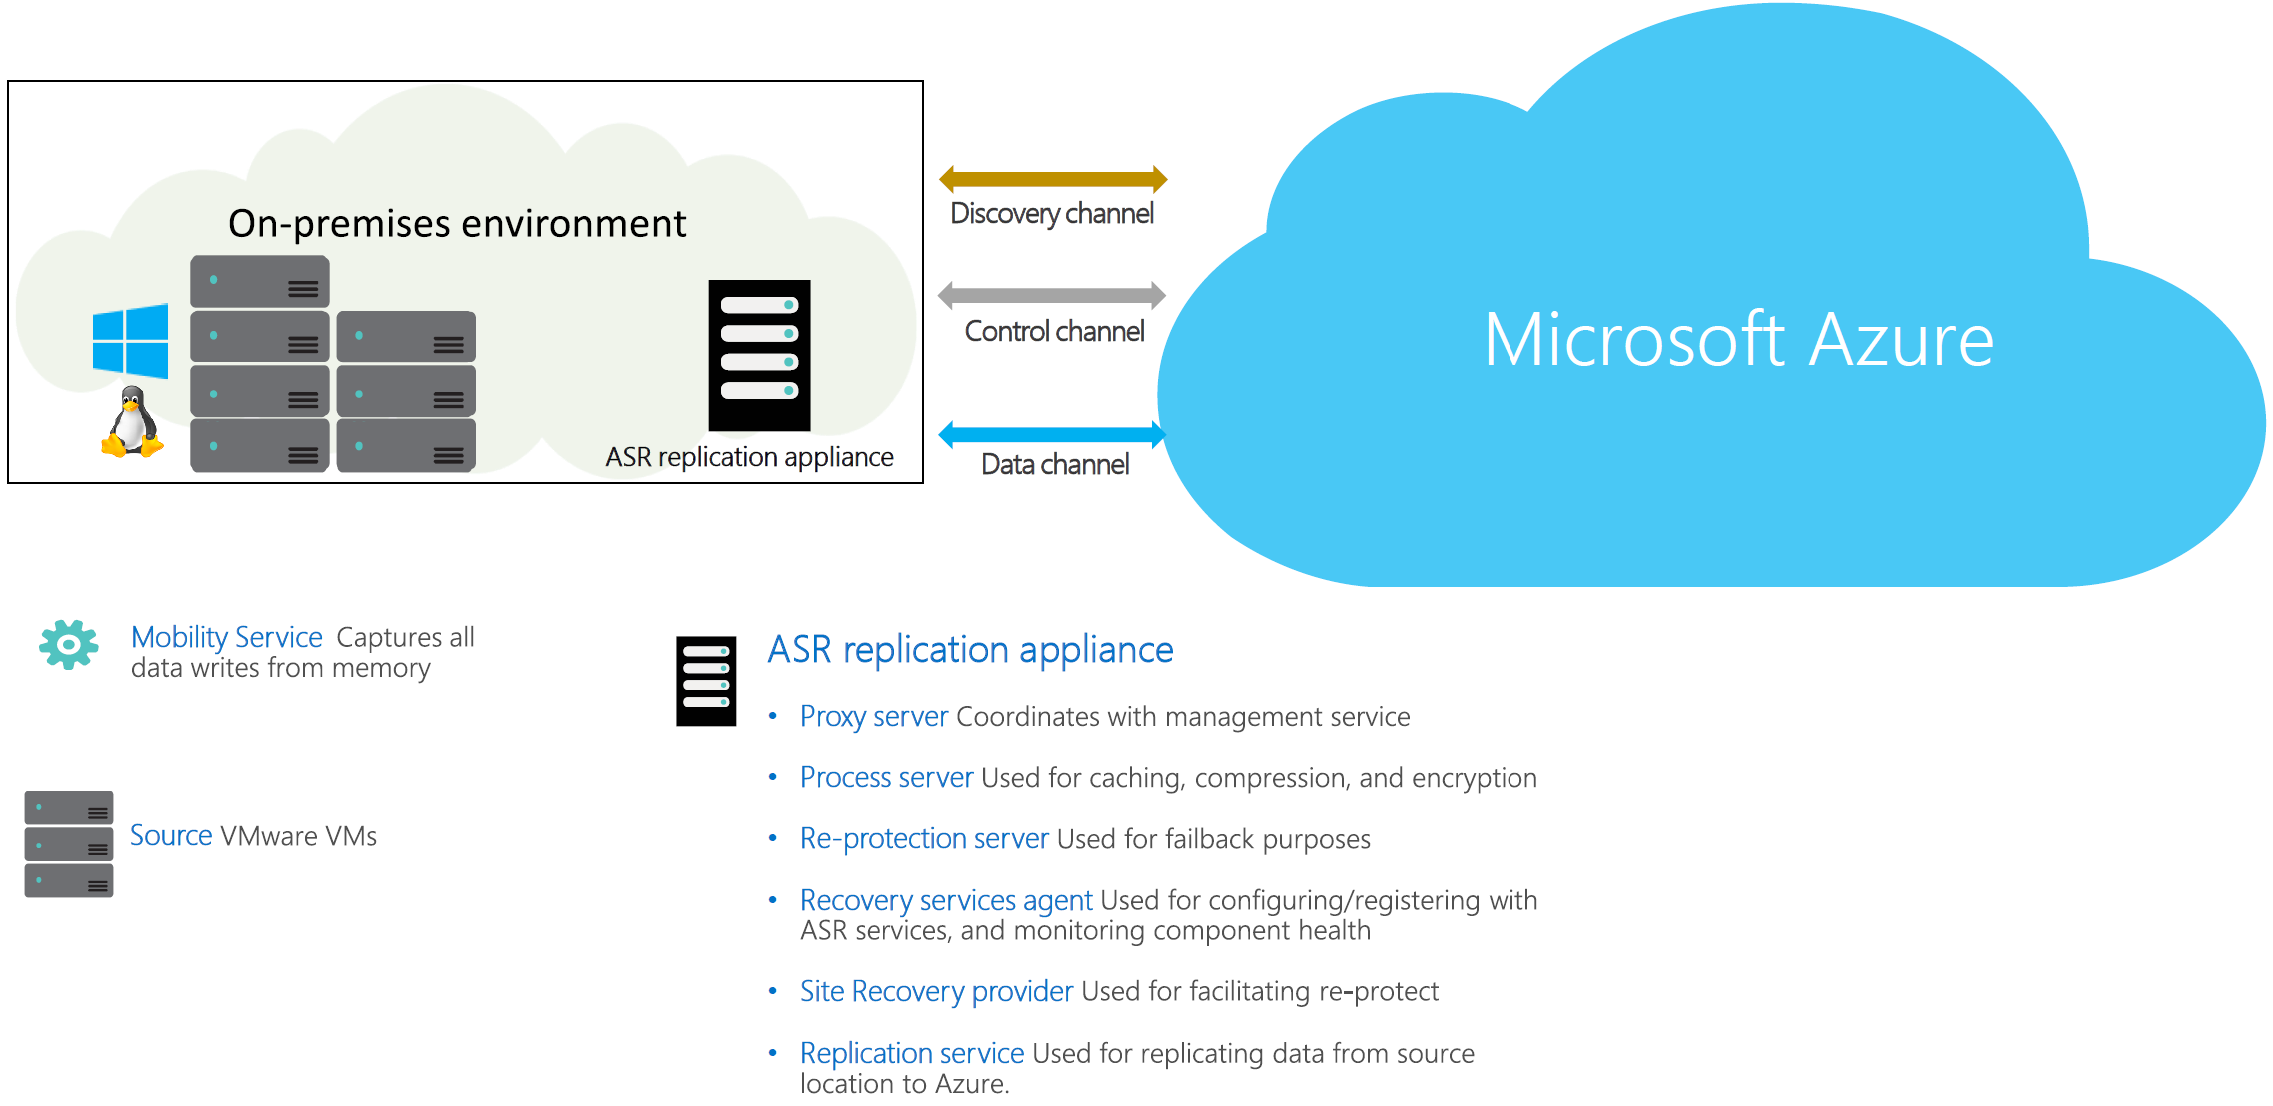 https://learn.microsoft.com/pt-br/azure/site-recovery/media/physical-server-azure-architecture-modernized/architecture-modernized.png